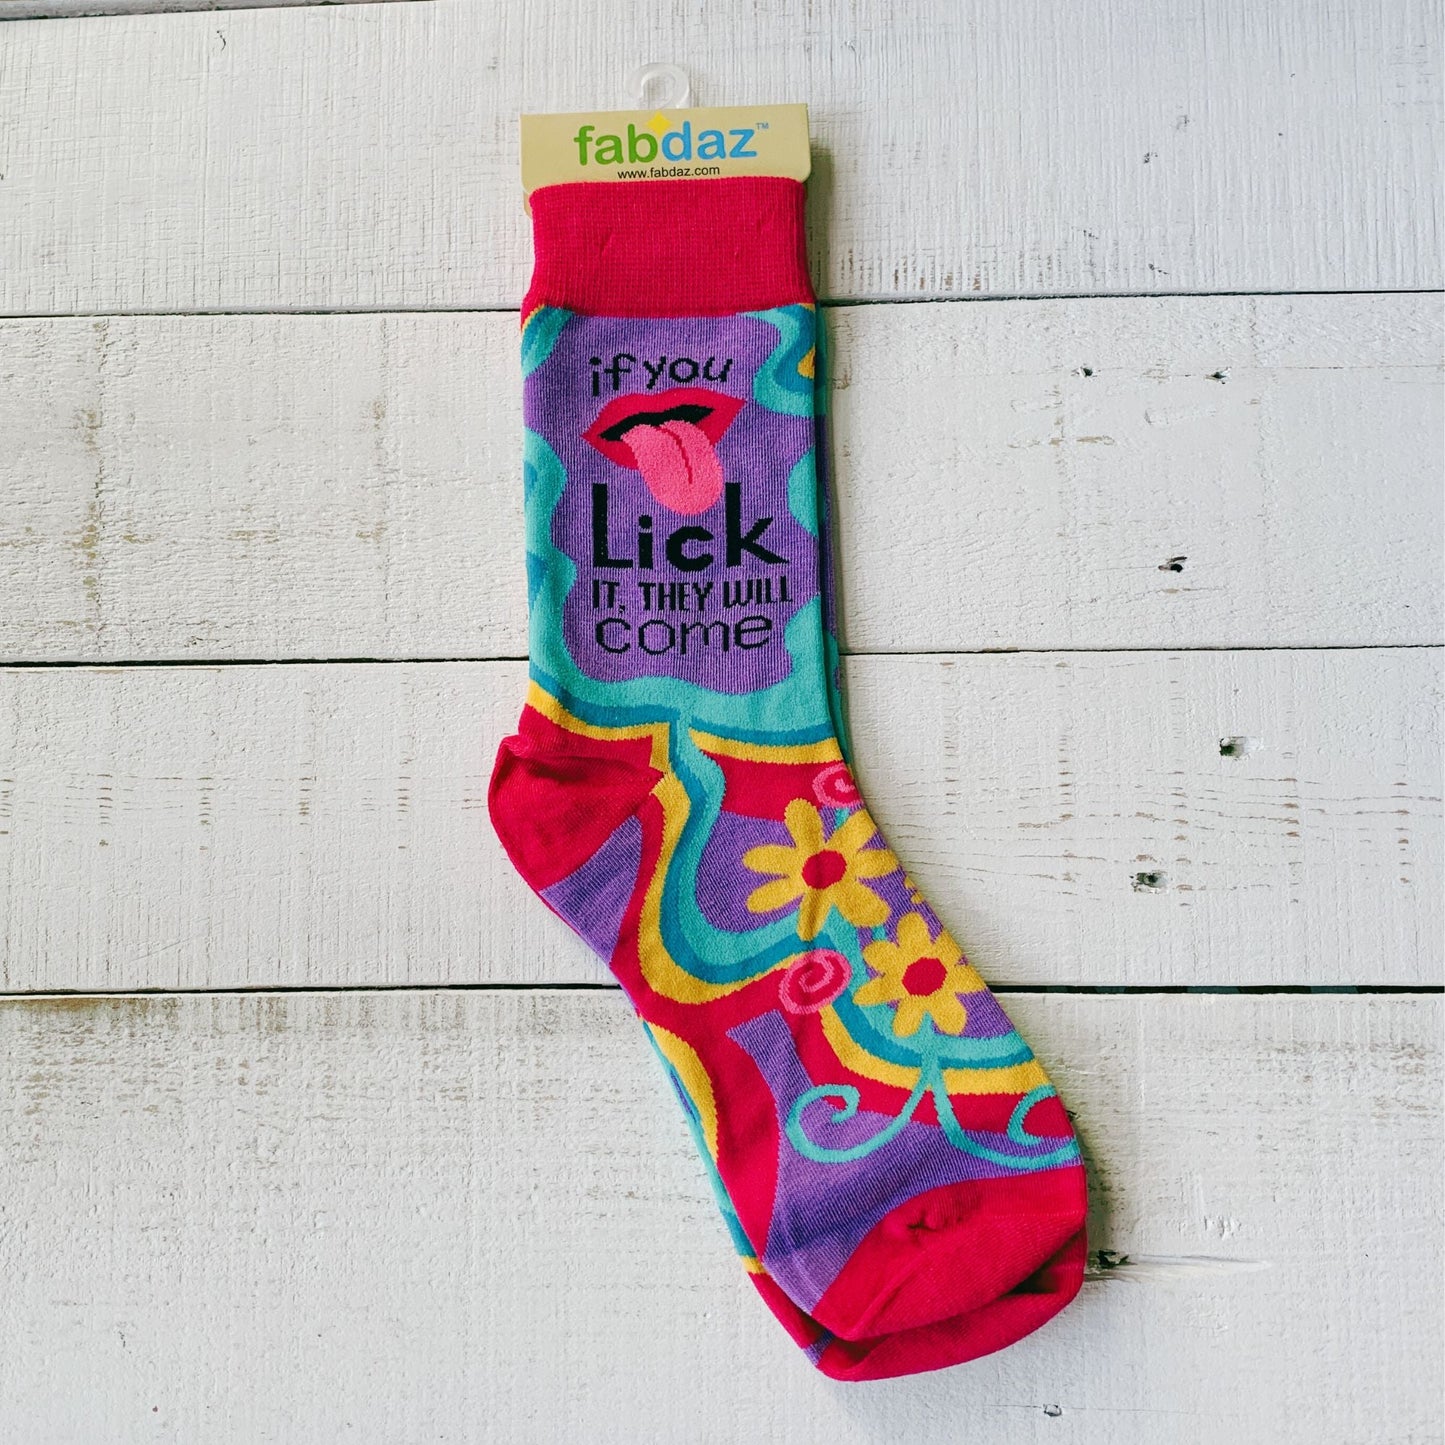 If You Lick It They Will Come Funny Women's Crew Socks